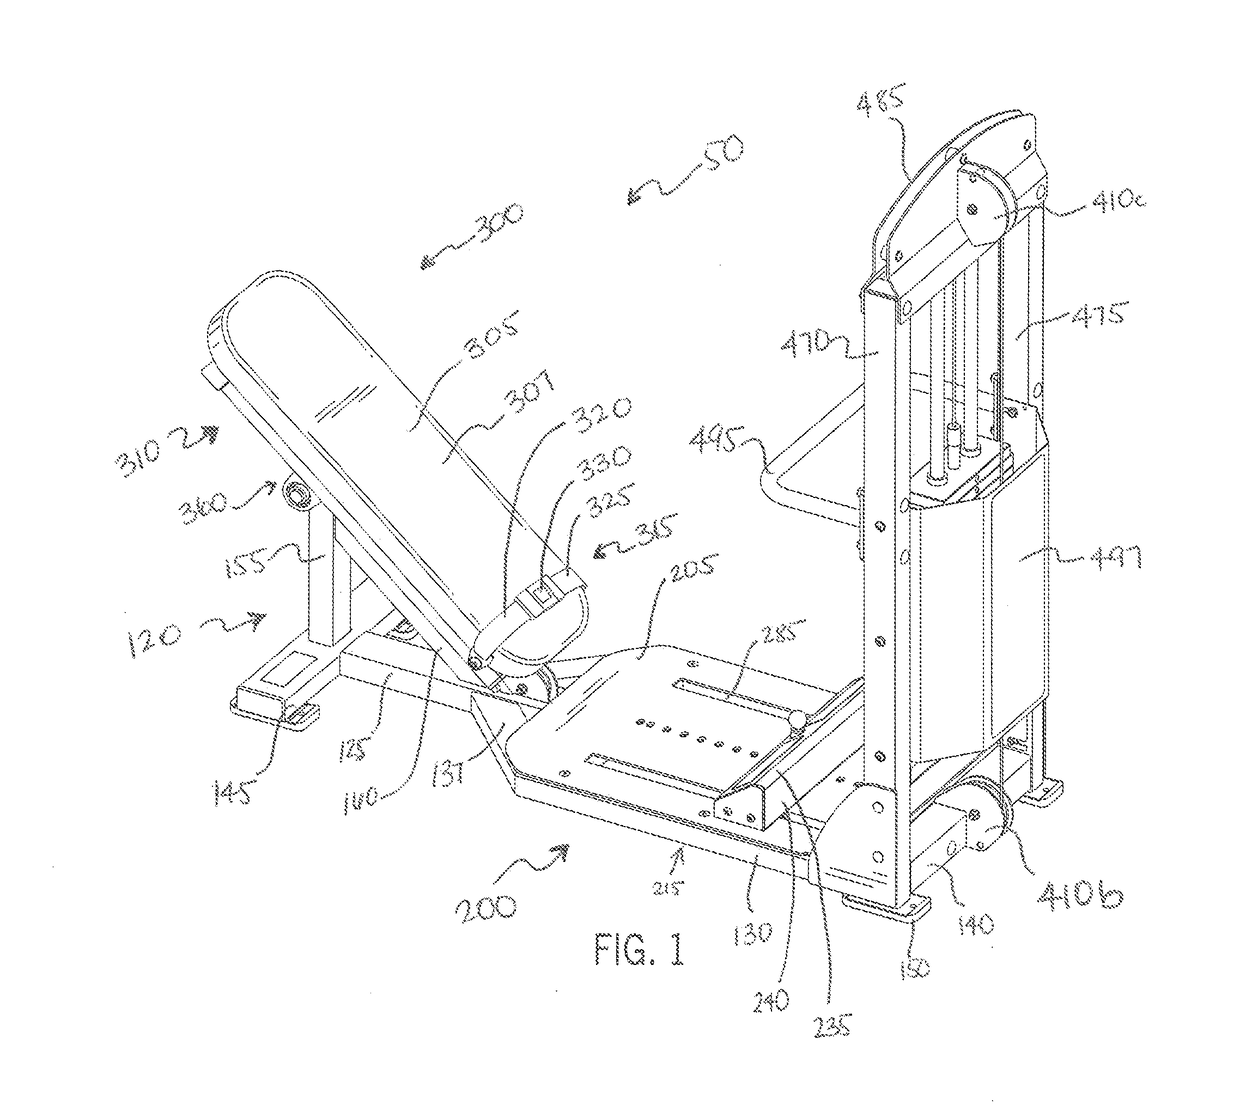 Exercise apparatus for performing a gluteal bridge movement